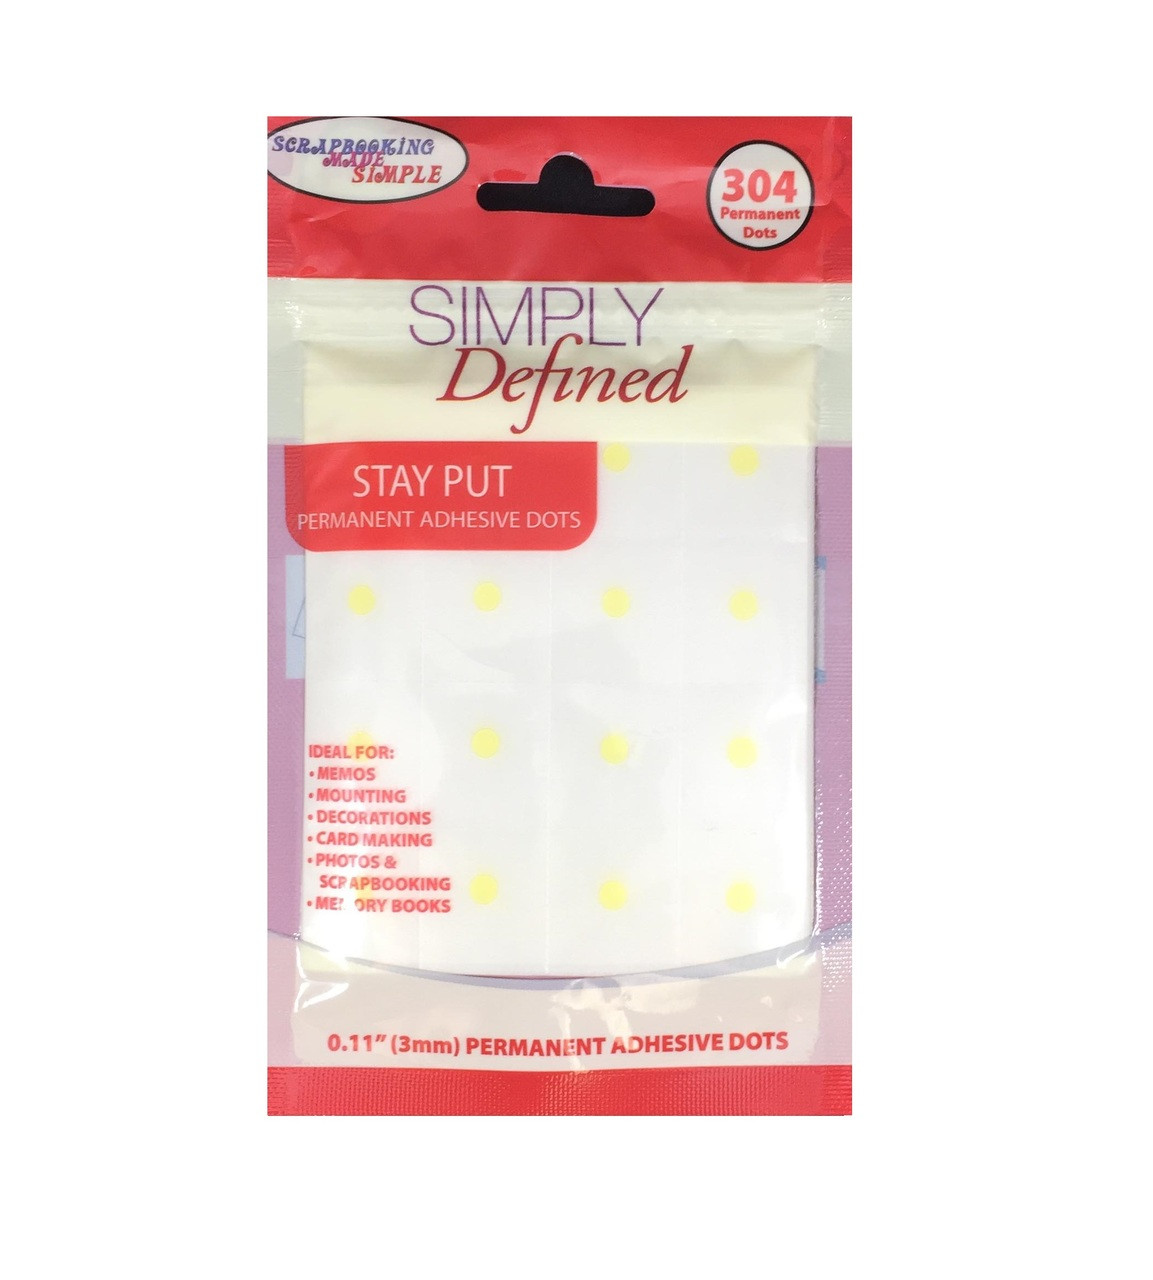 Simply Defined Stay Put - 0.11(3mm) Yellow Permanent Adhesive Dots -  Scrapbooking Made Simple